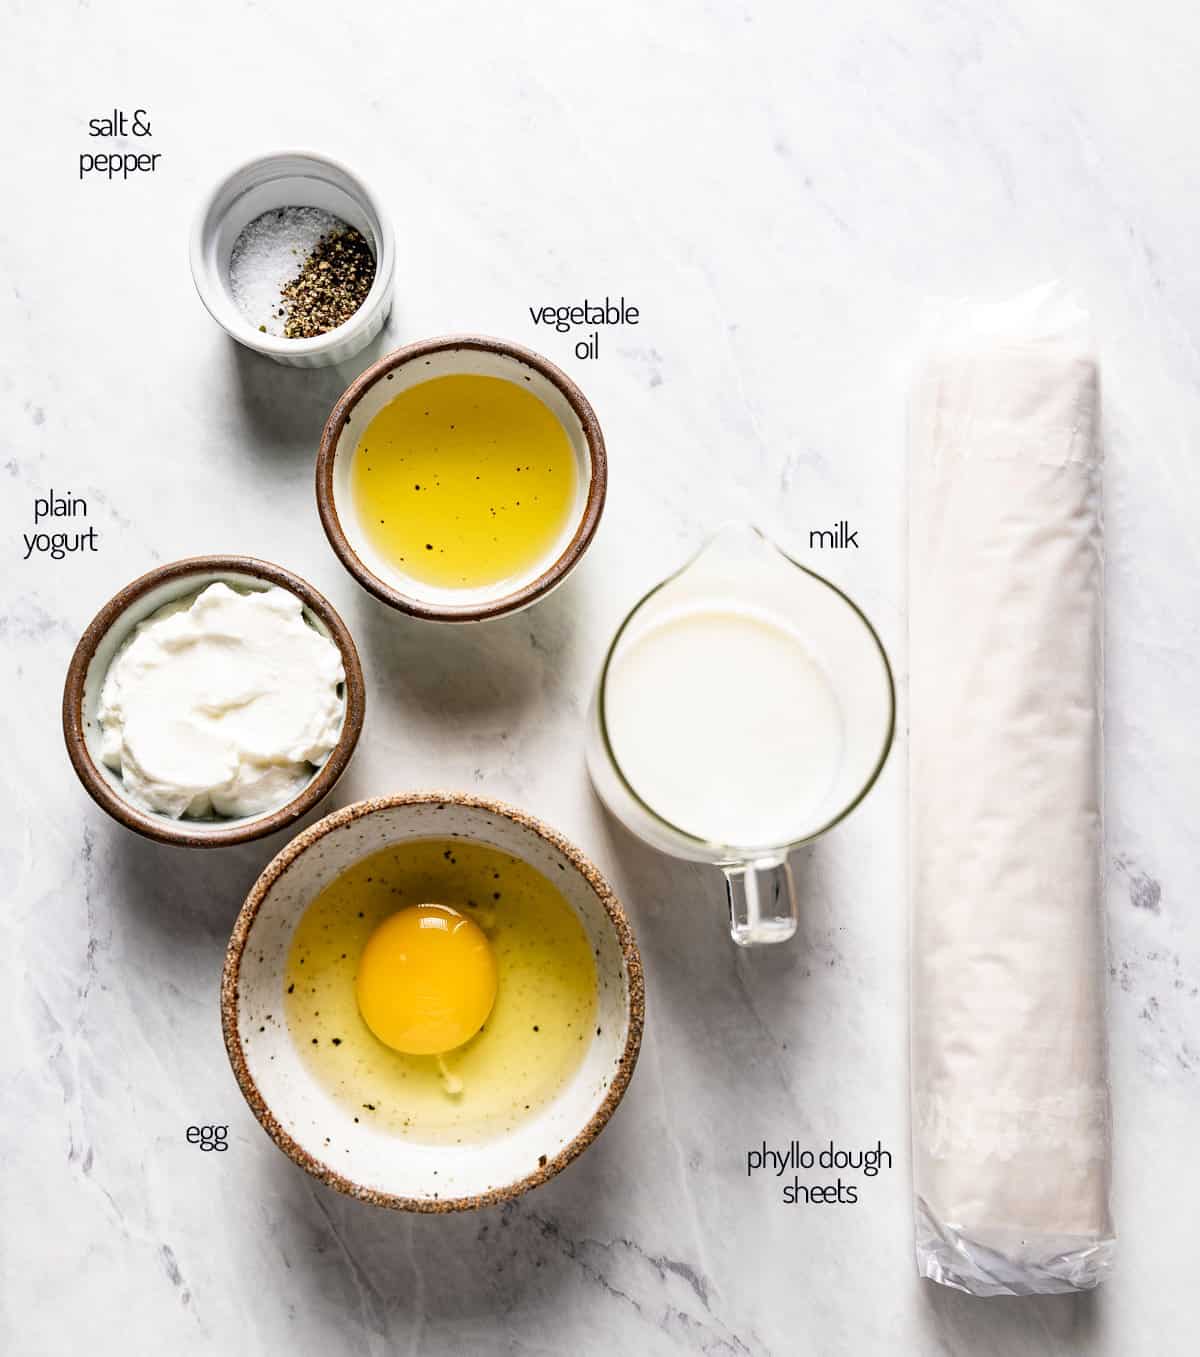 yogurt wash and phyllo dough - ingredients for borek recipe on a marble backdrop